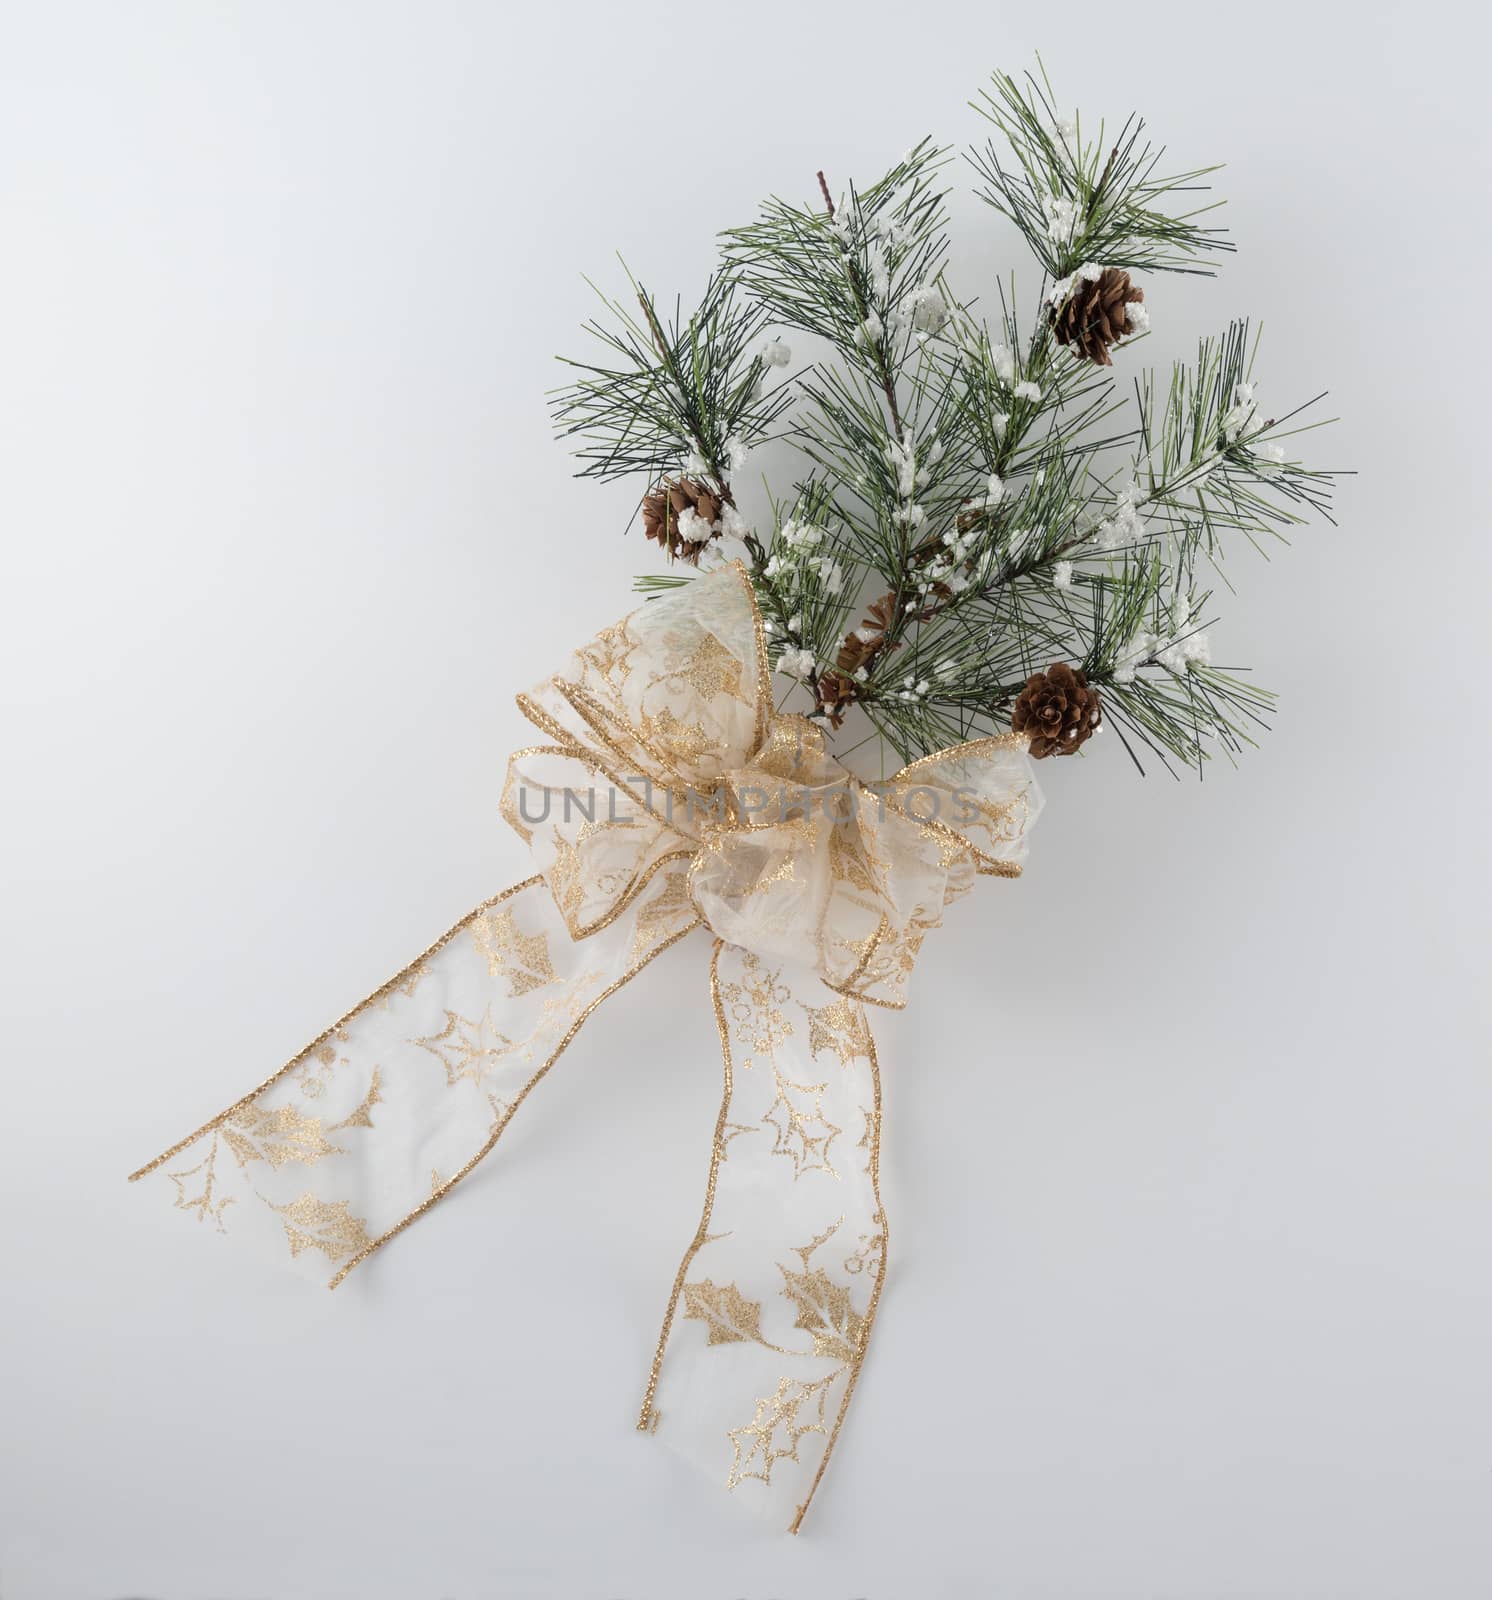 Pine Bough Decoration with Sparkly Gold Bow by krisblackphotography